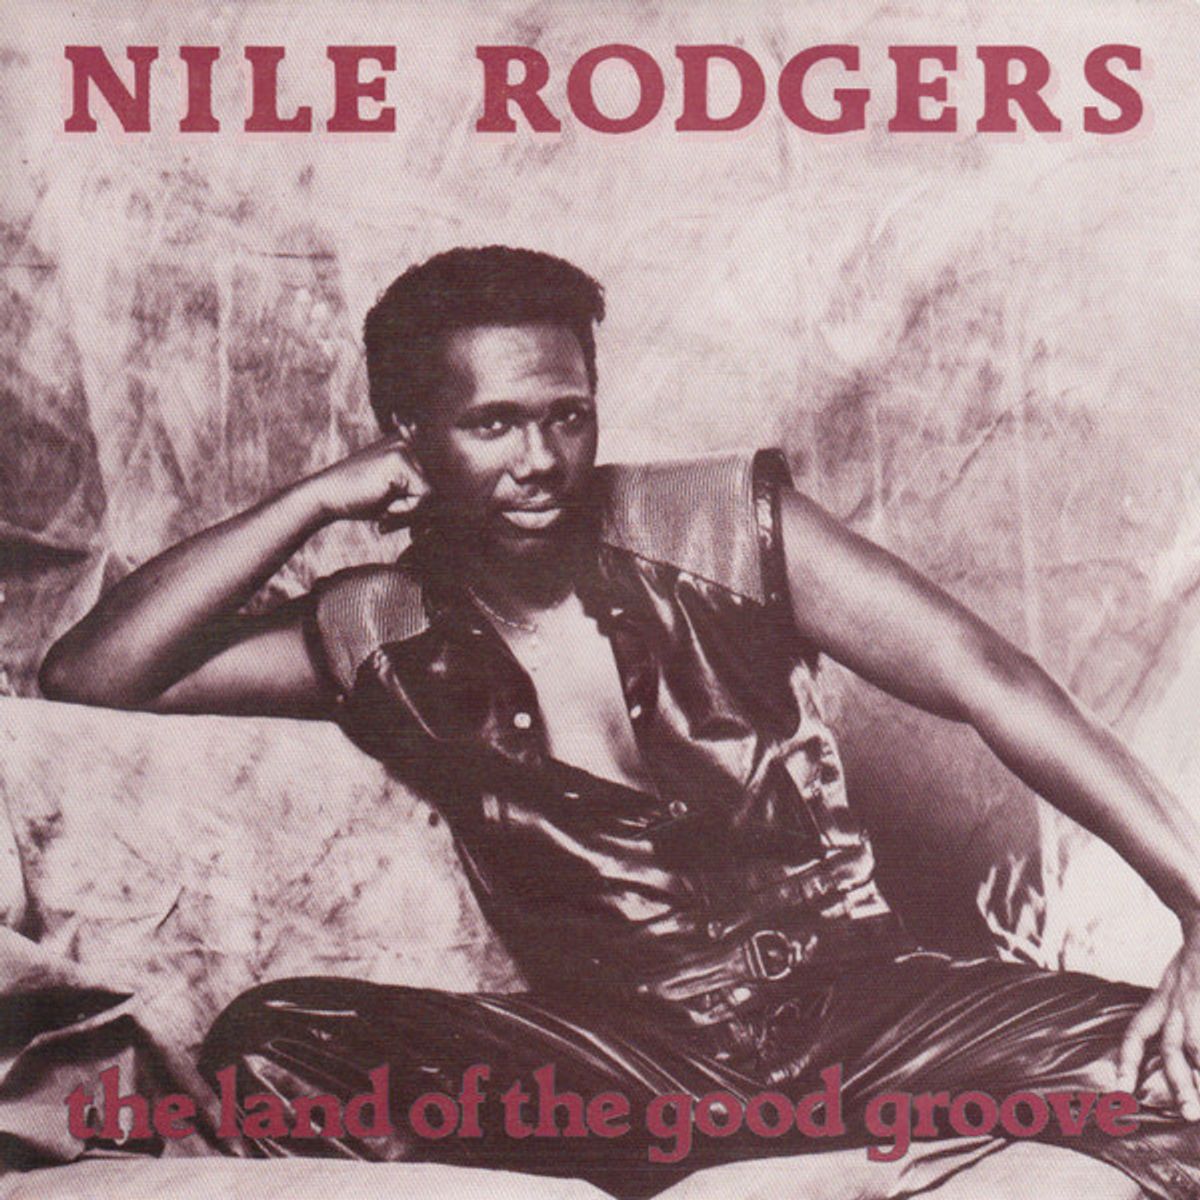 #CestDuNile - Nile Rodgers - The Land Of The Good Groove (1983)